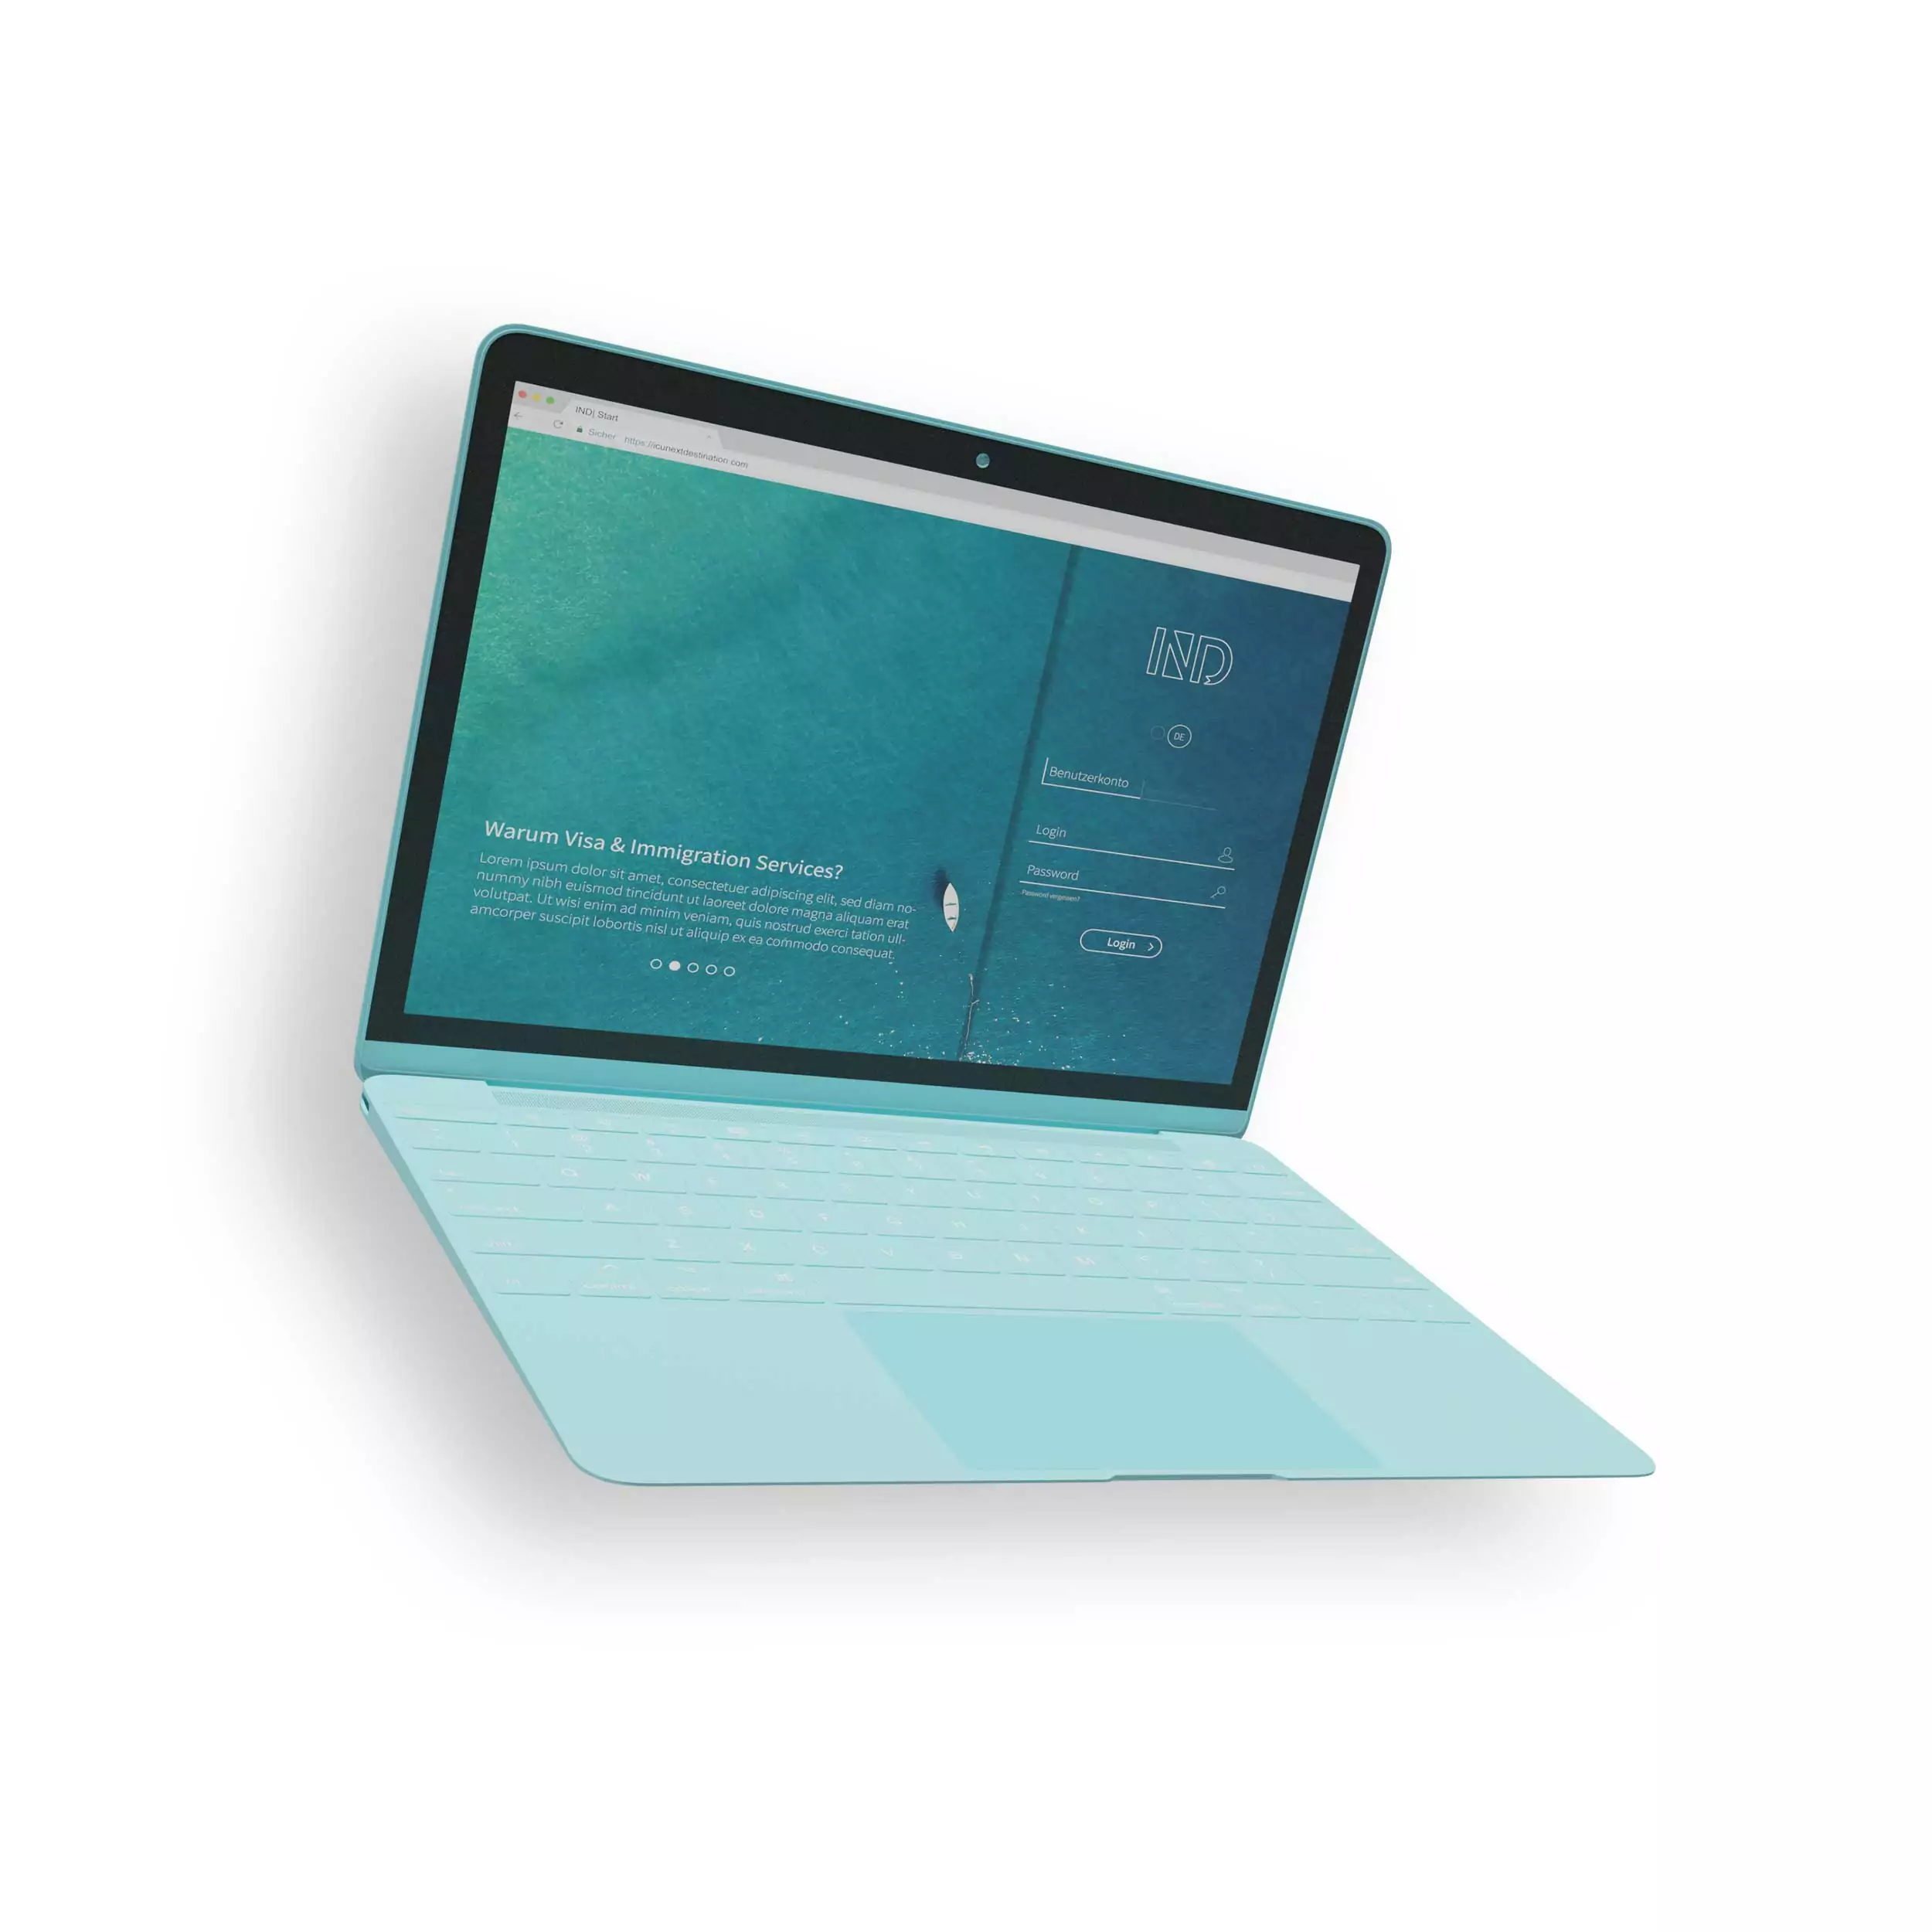 Turquoise laptop with IND homepage